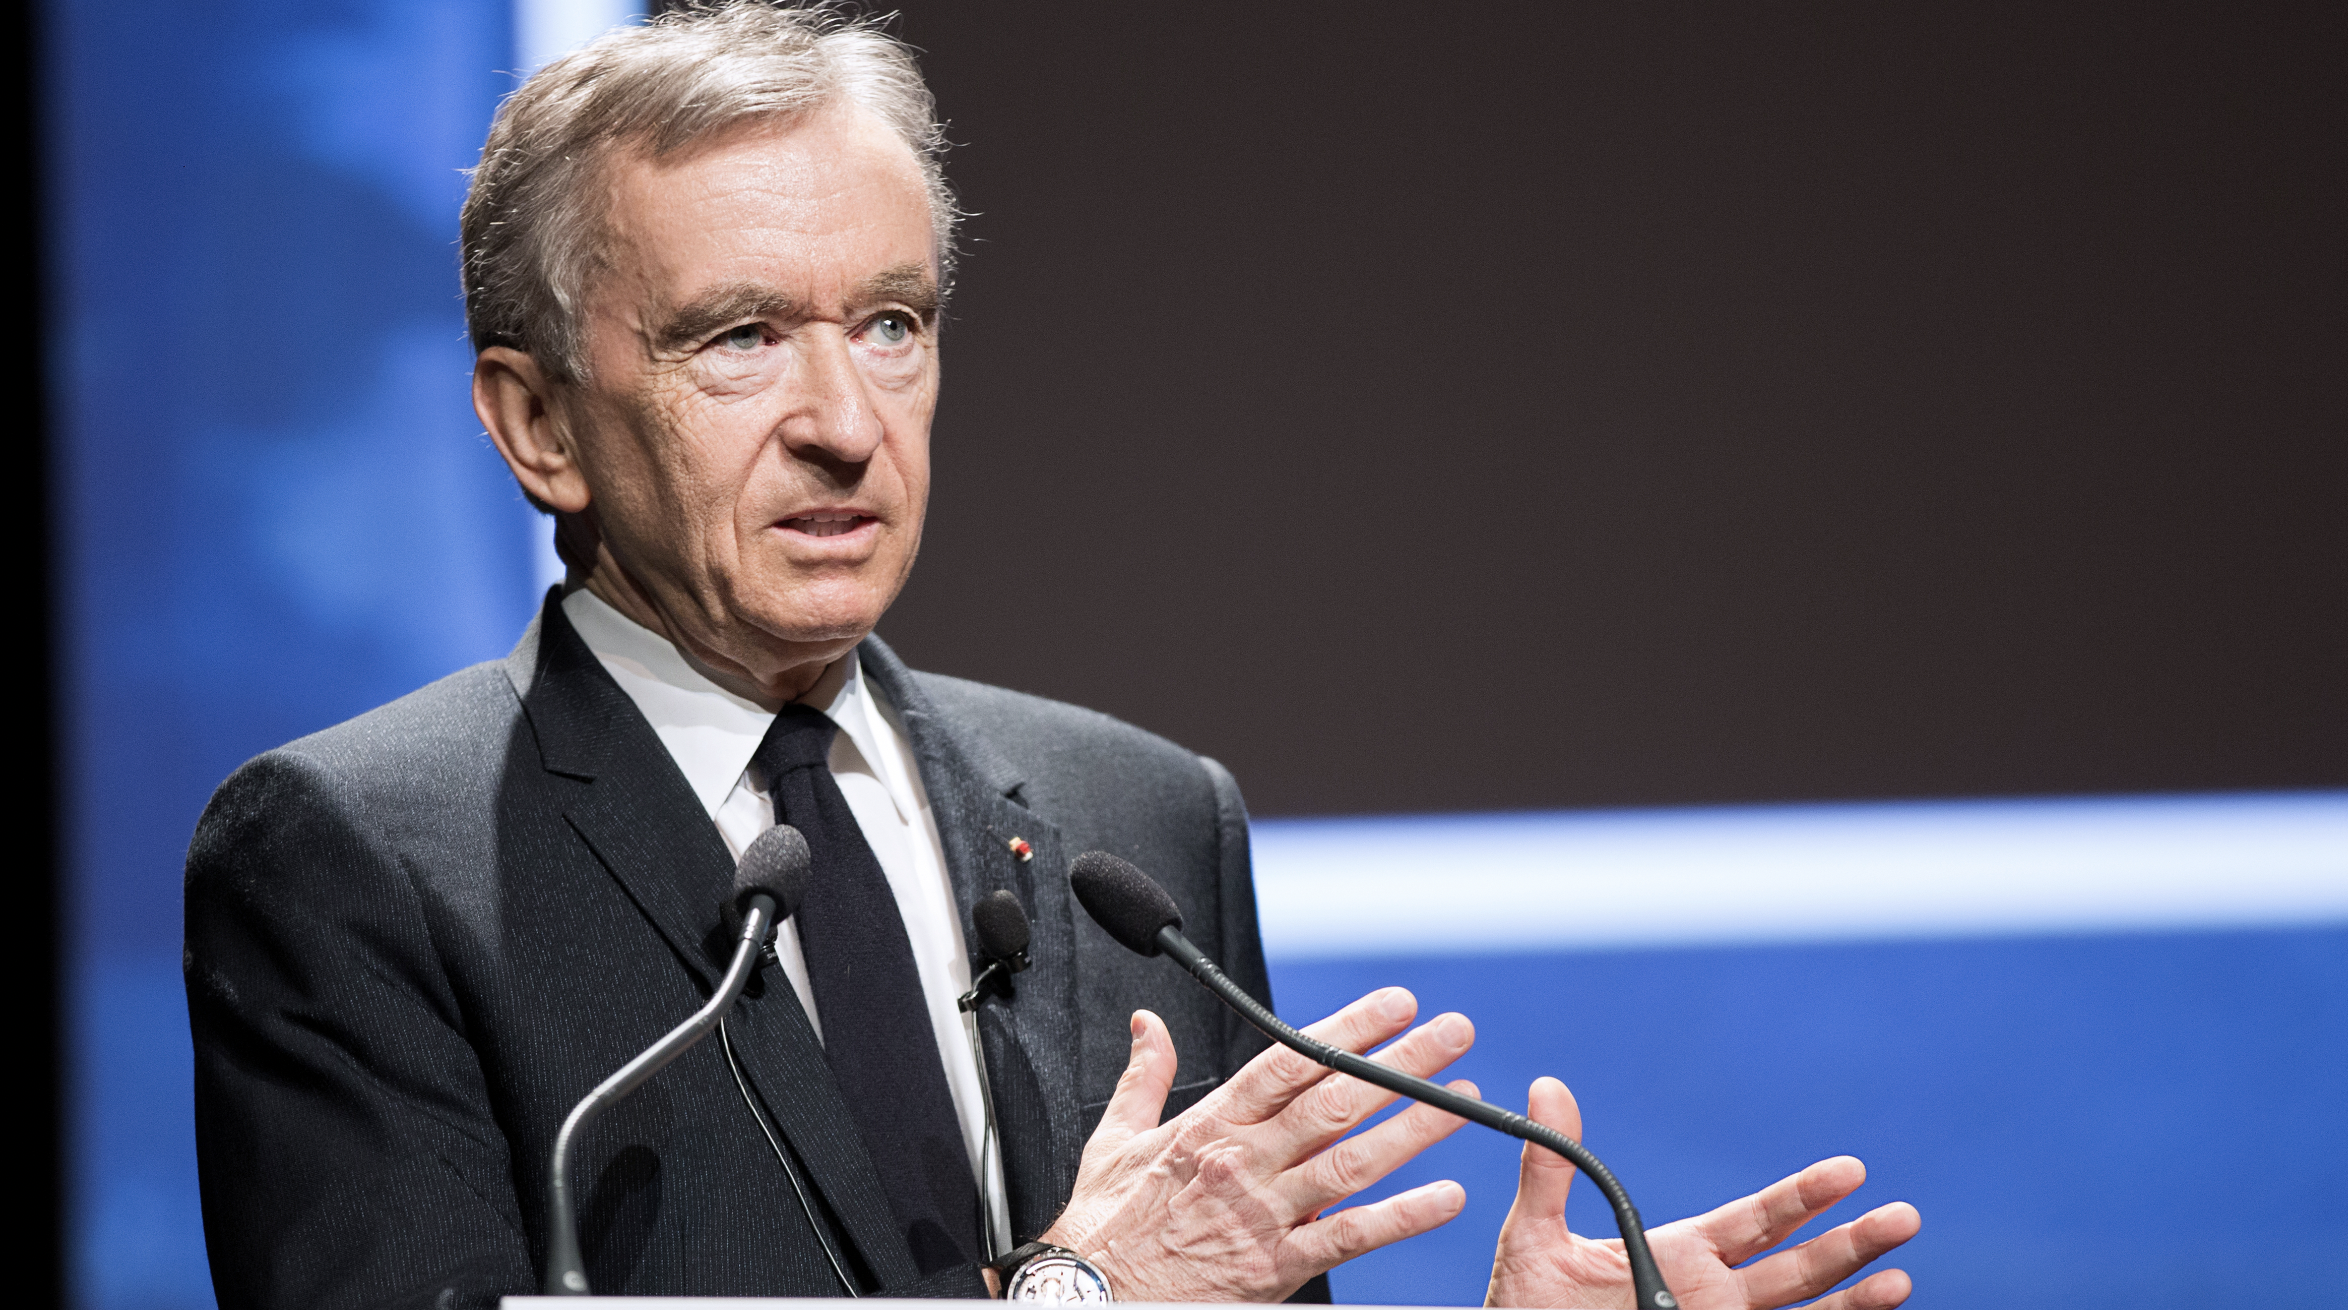 Meet Bernard Arnault, the richest man in the world and the owner